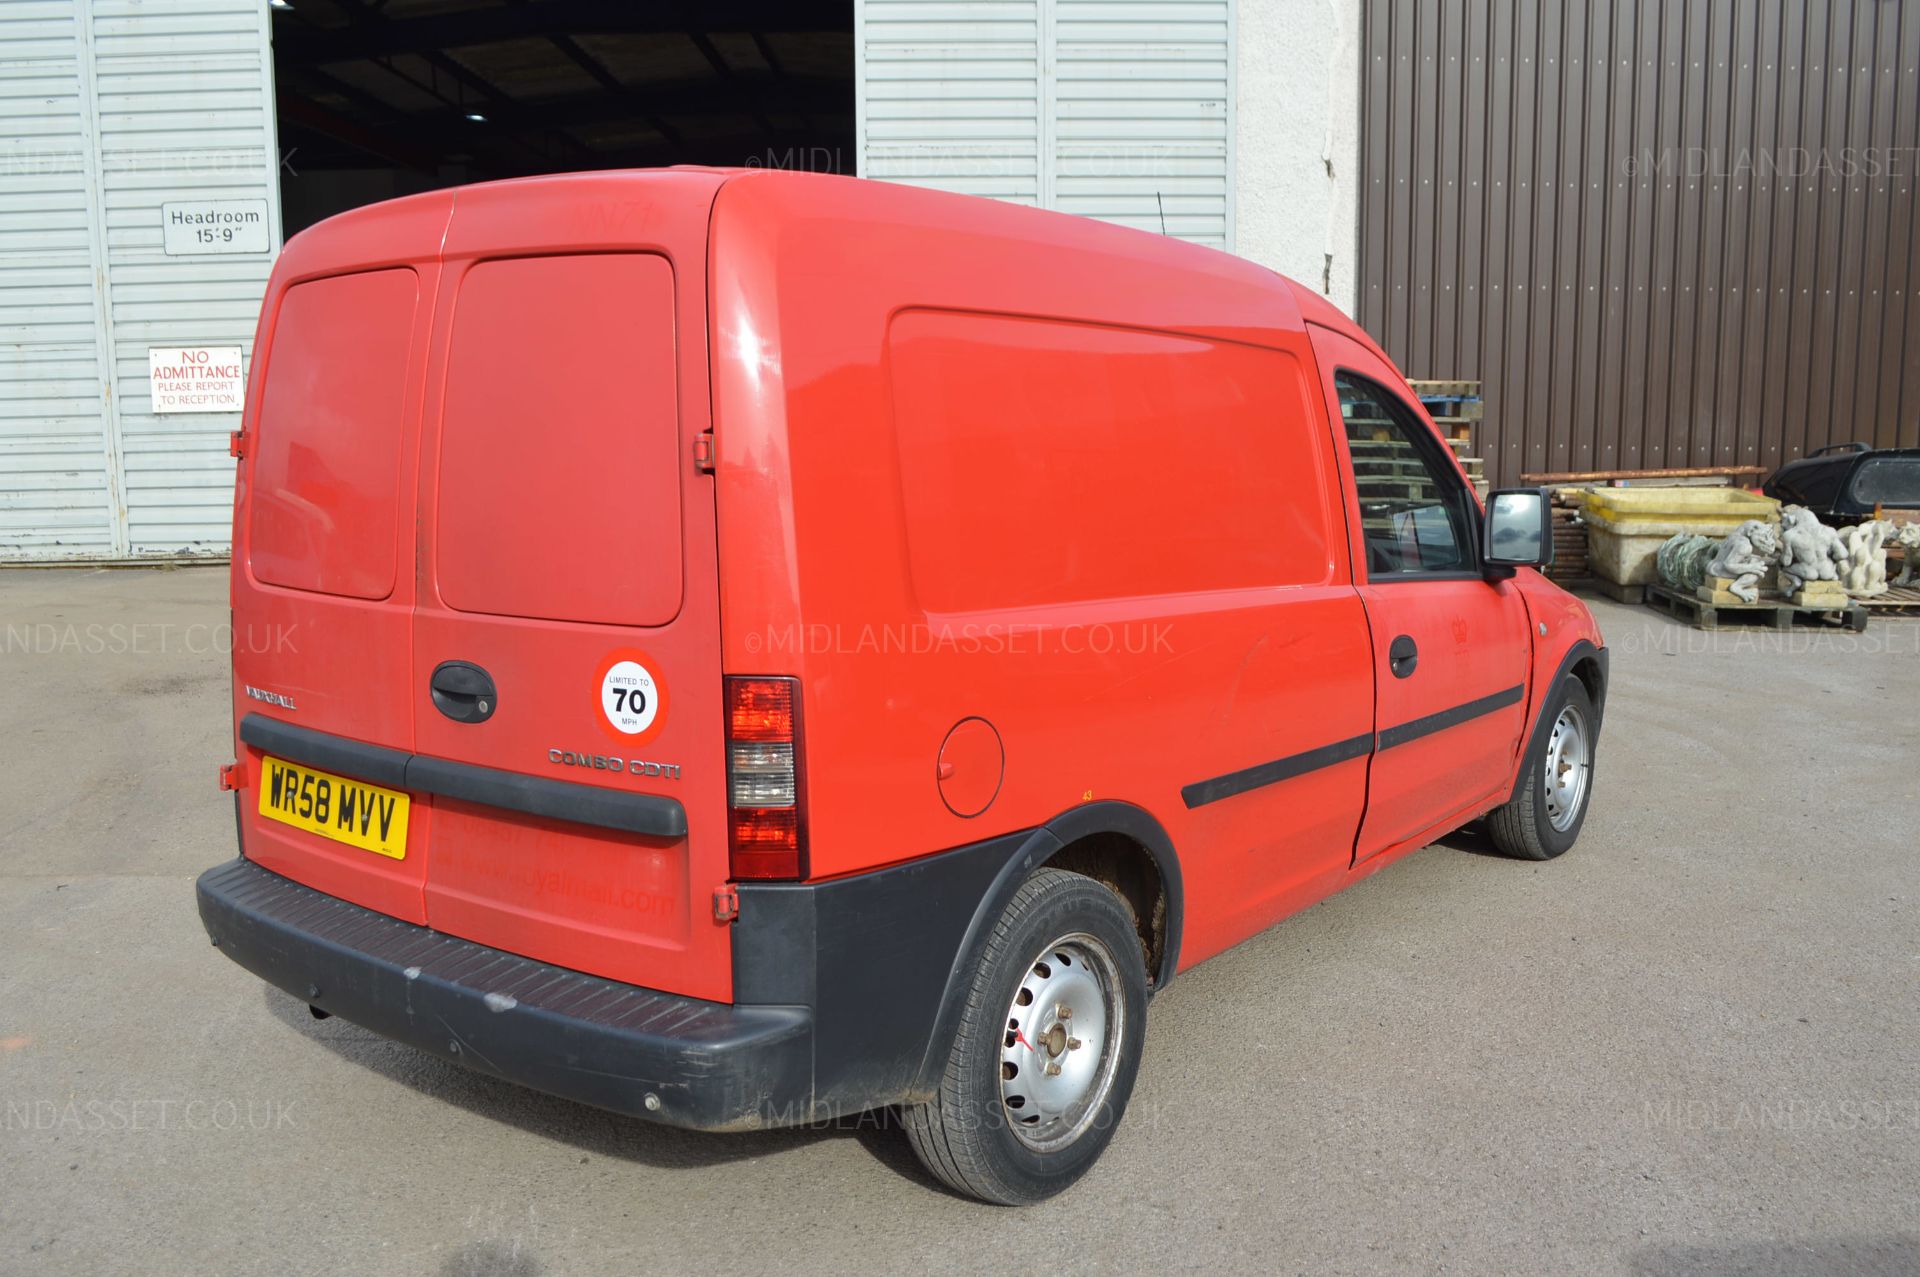 KB - 2008/58 REG VAUXHALL COMBO 1700 CDTI - 1 PREVIOUS OWNER, ROYAL MAIL *NO VAT*   DATE OF - Image 6 of 19